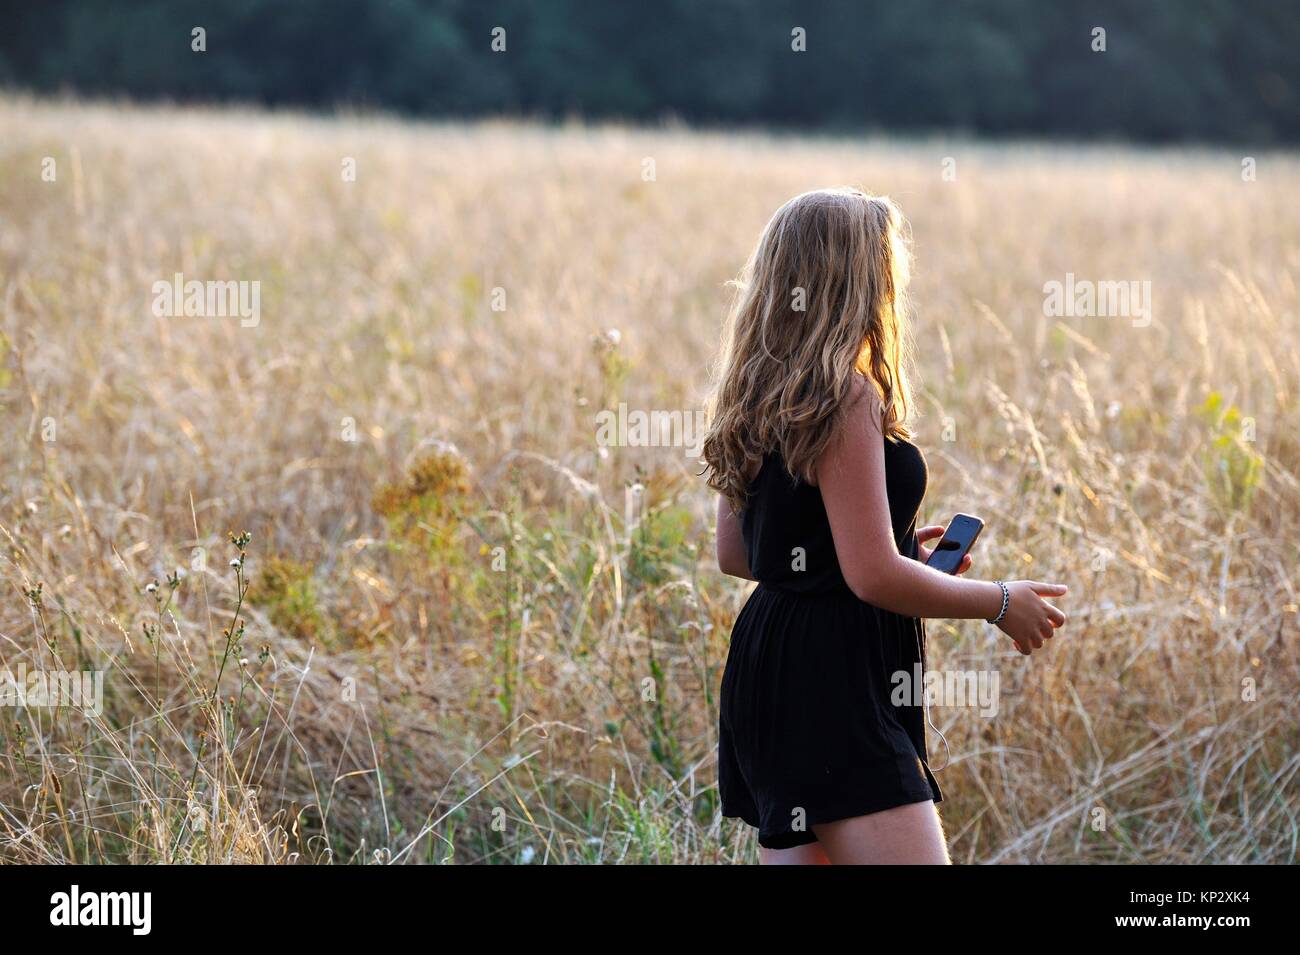 young girl listening music with her portable media player in a field at sunset, France, Europe. Stock Photo